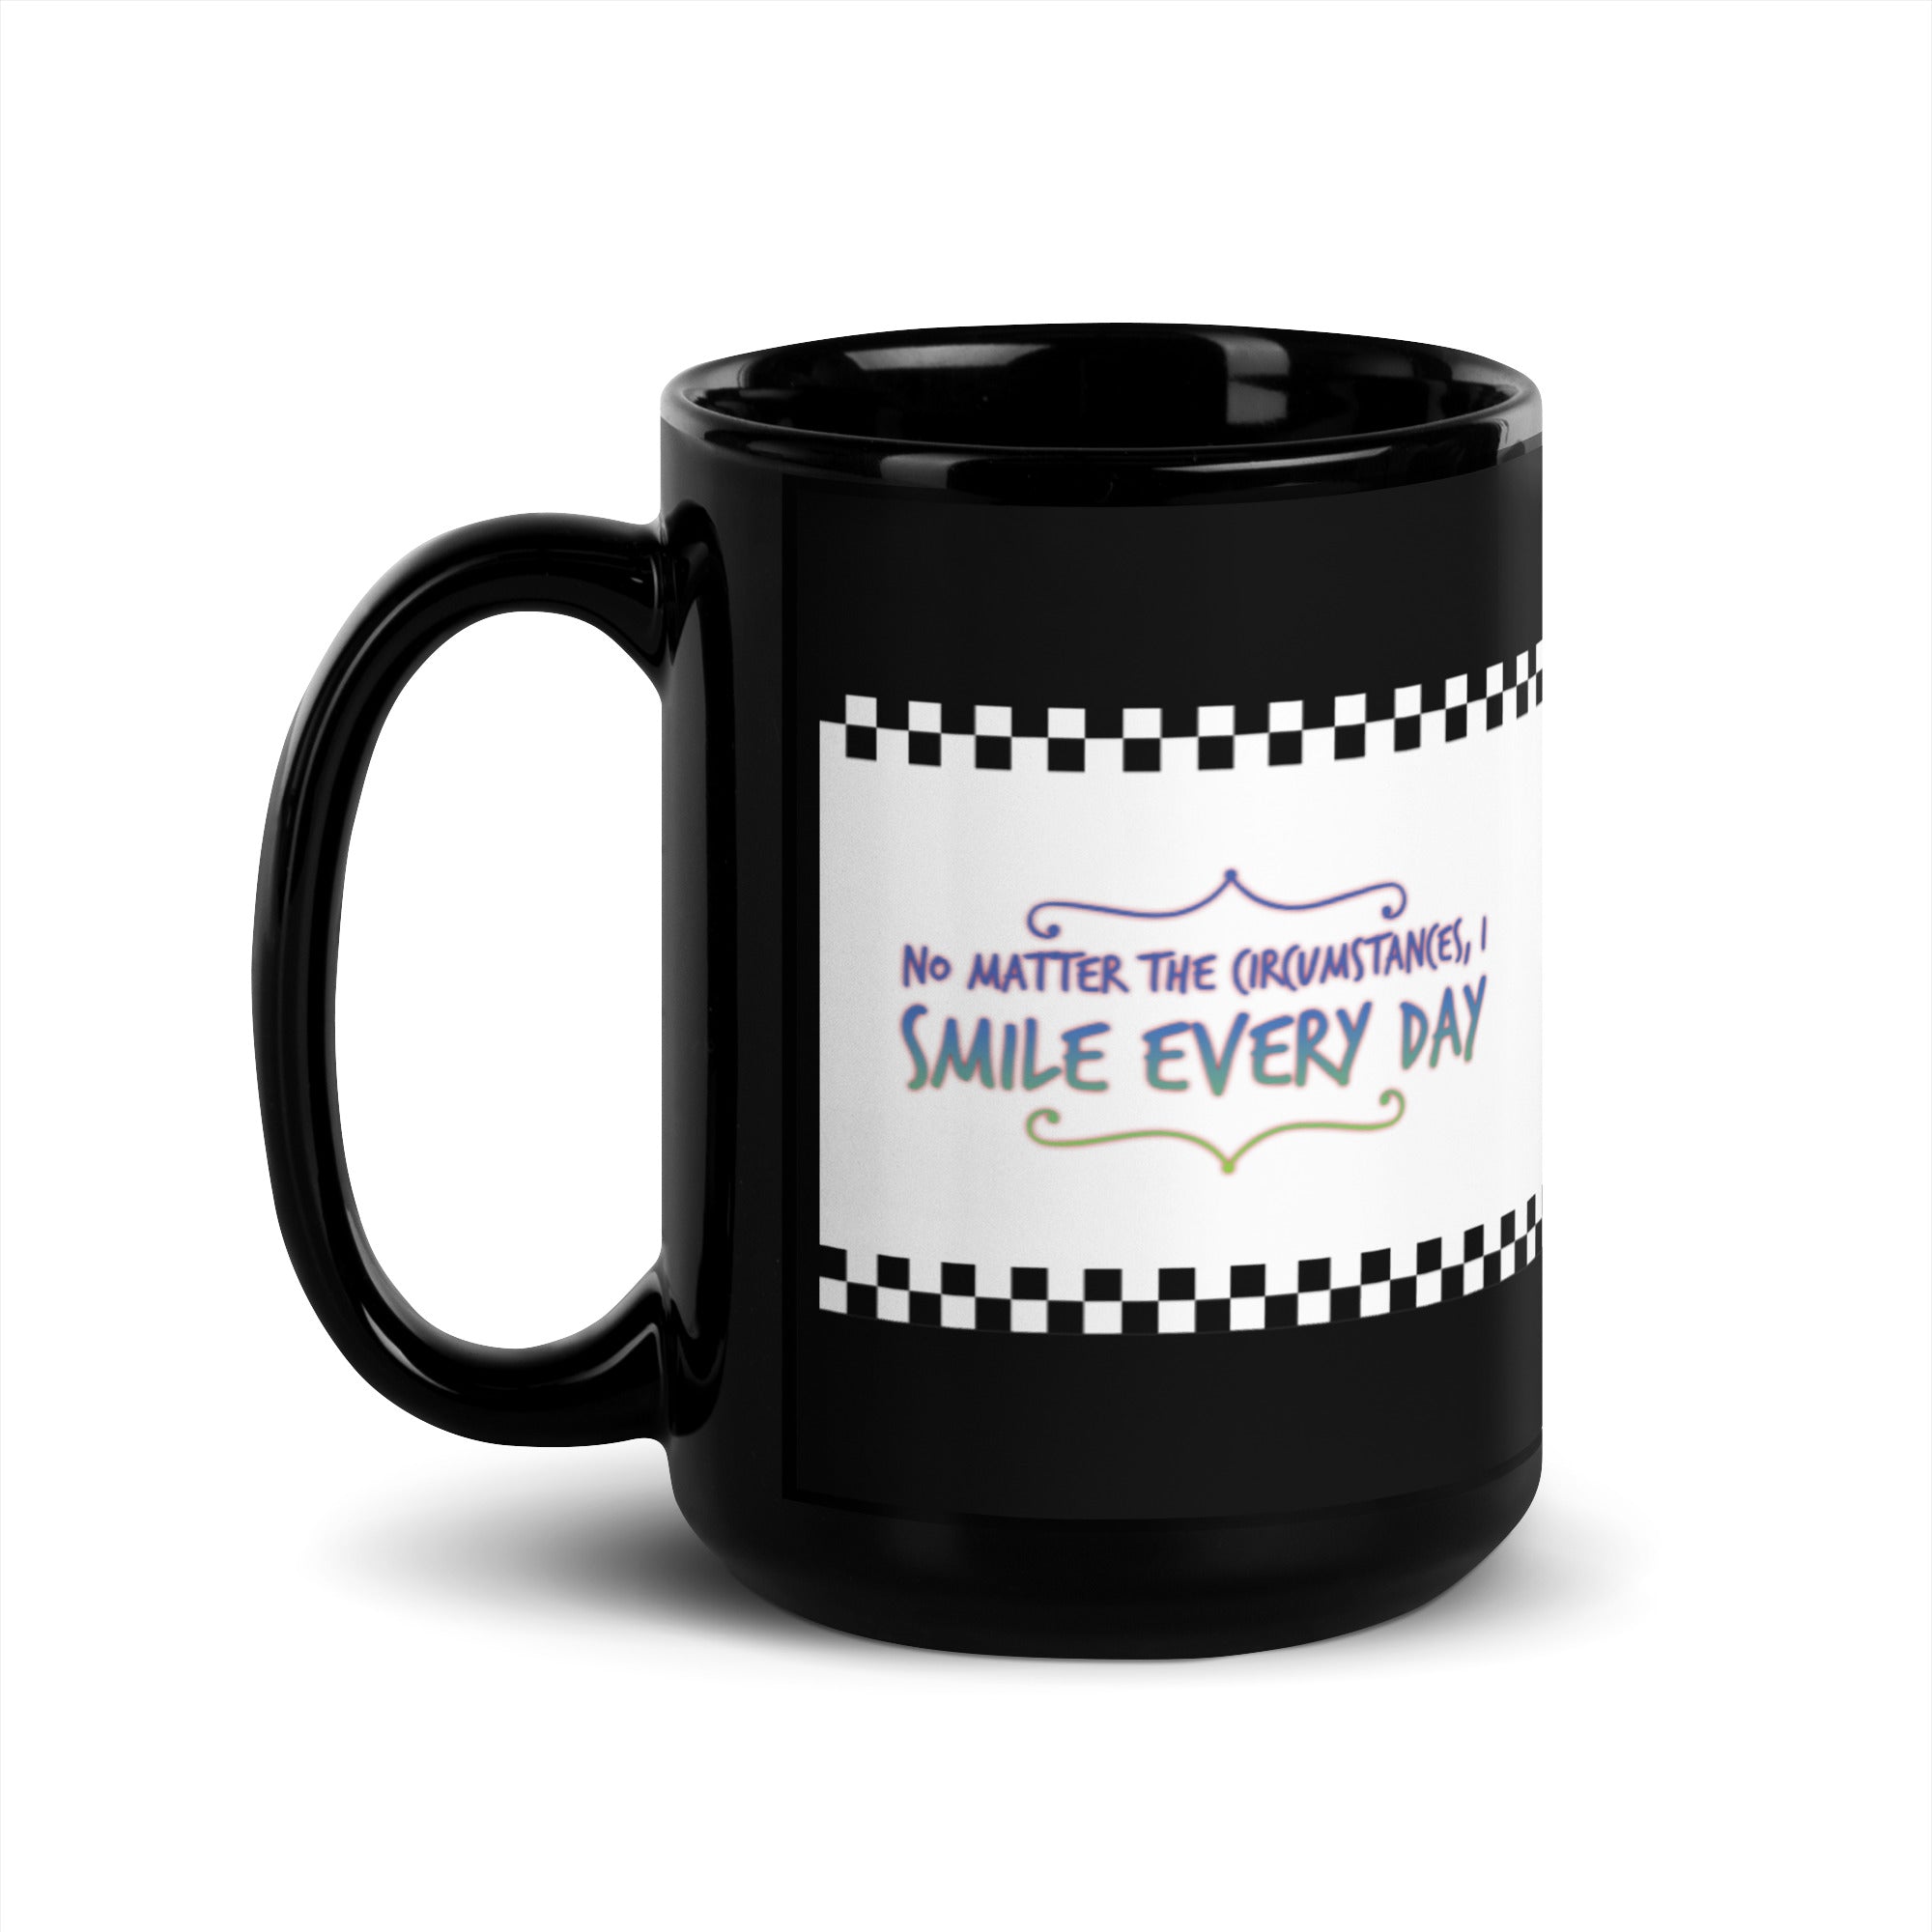 GloWell Designs - Black Glossy Mug - Affirmation Quote - I Smile Every Day - GloWell Designs